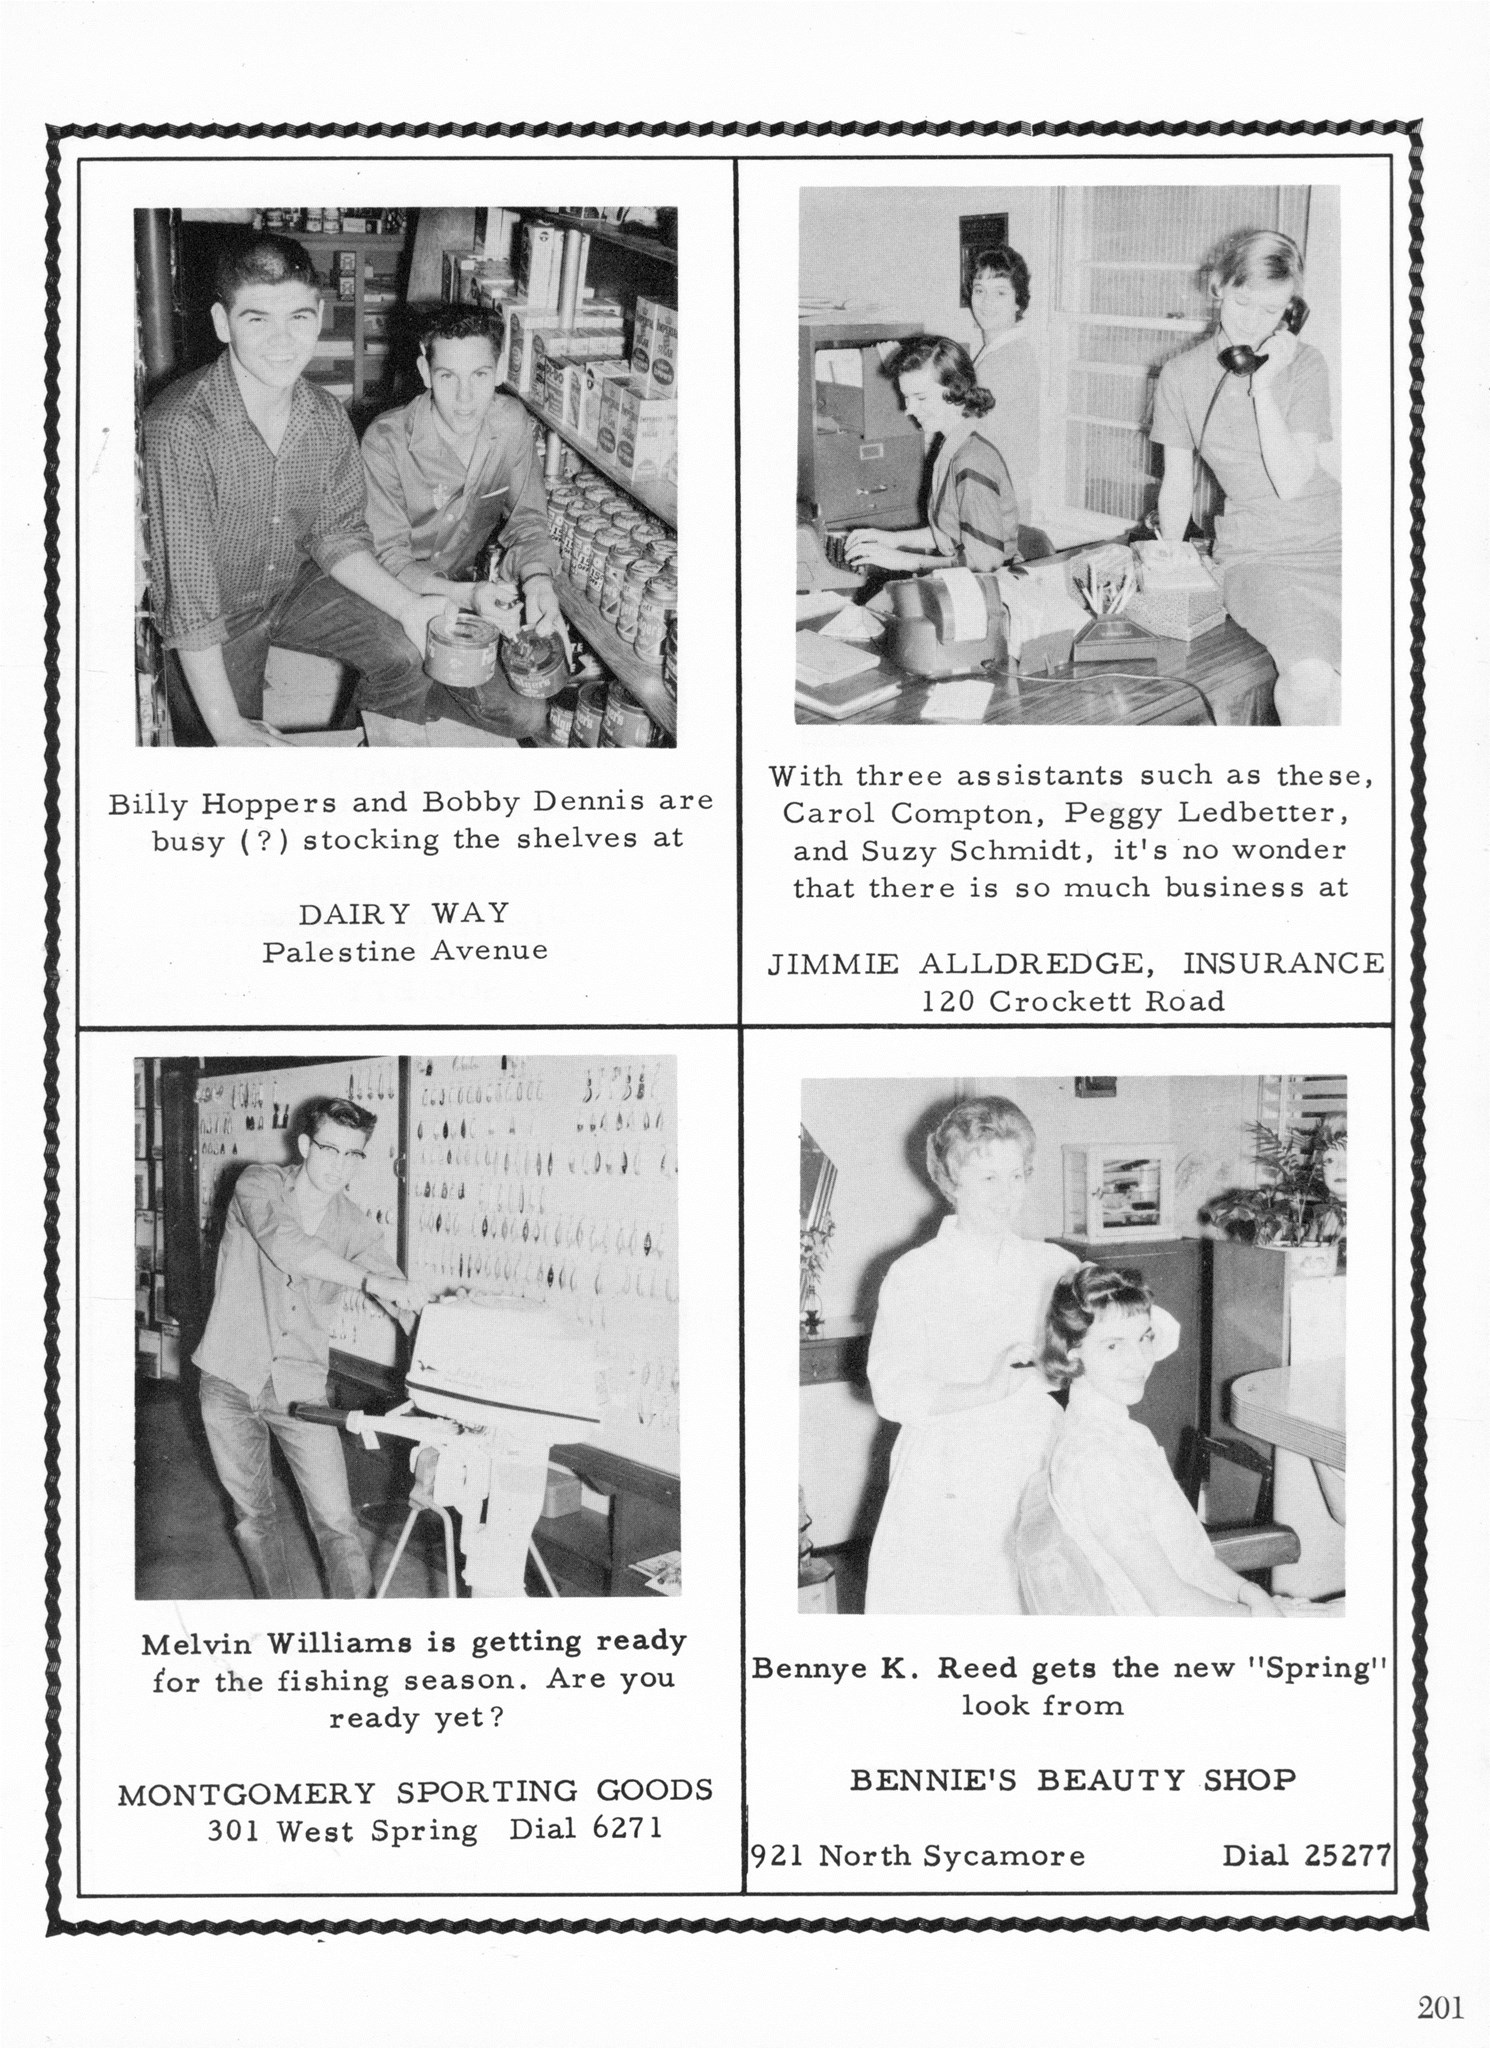 ../../../Images/Large/1959/Arclight-1959-pg0201.jpg